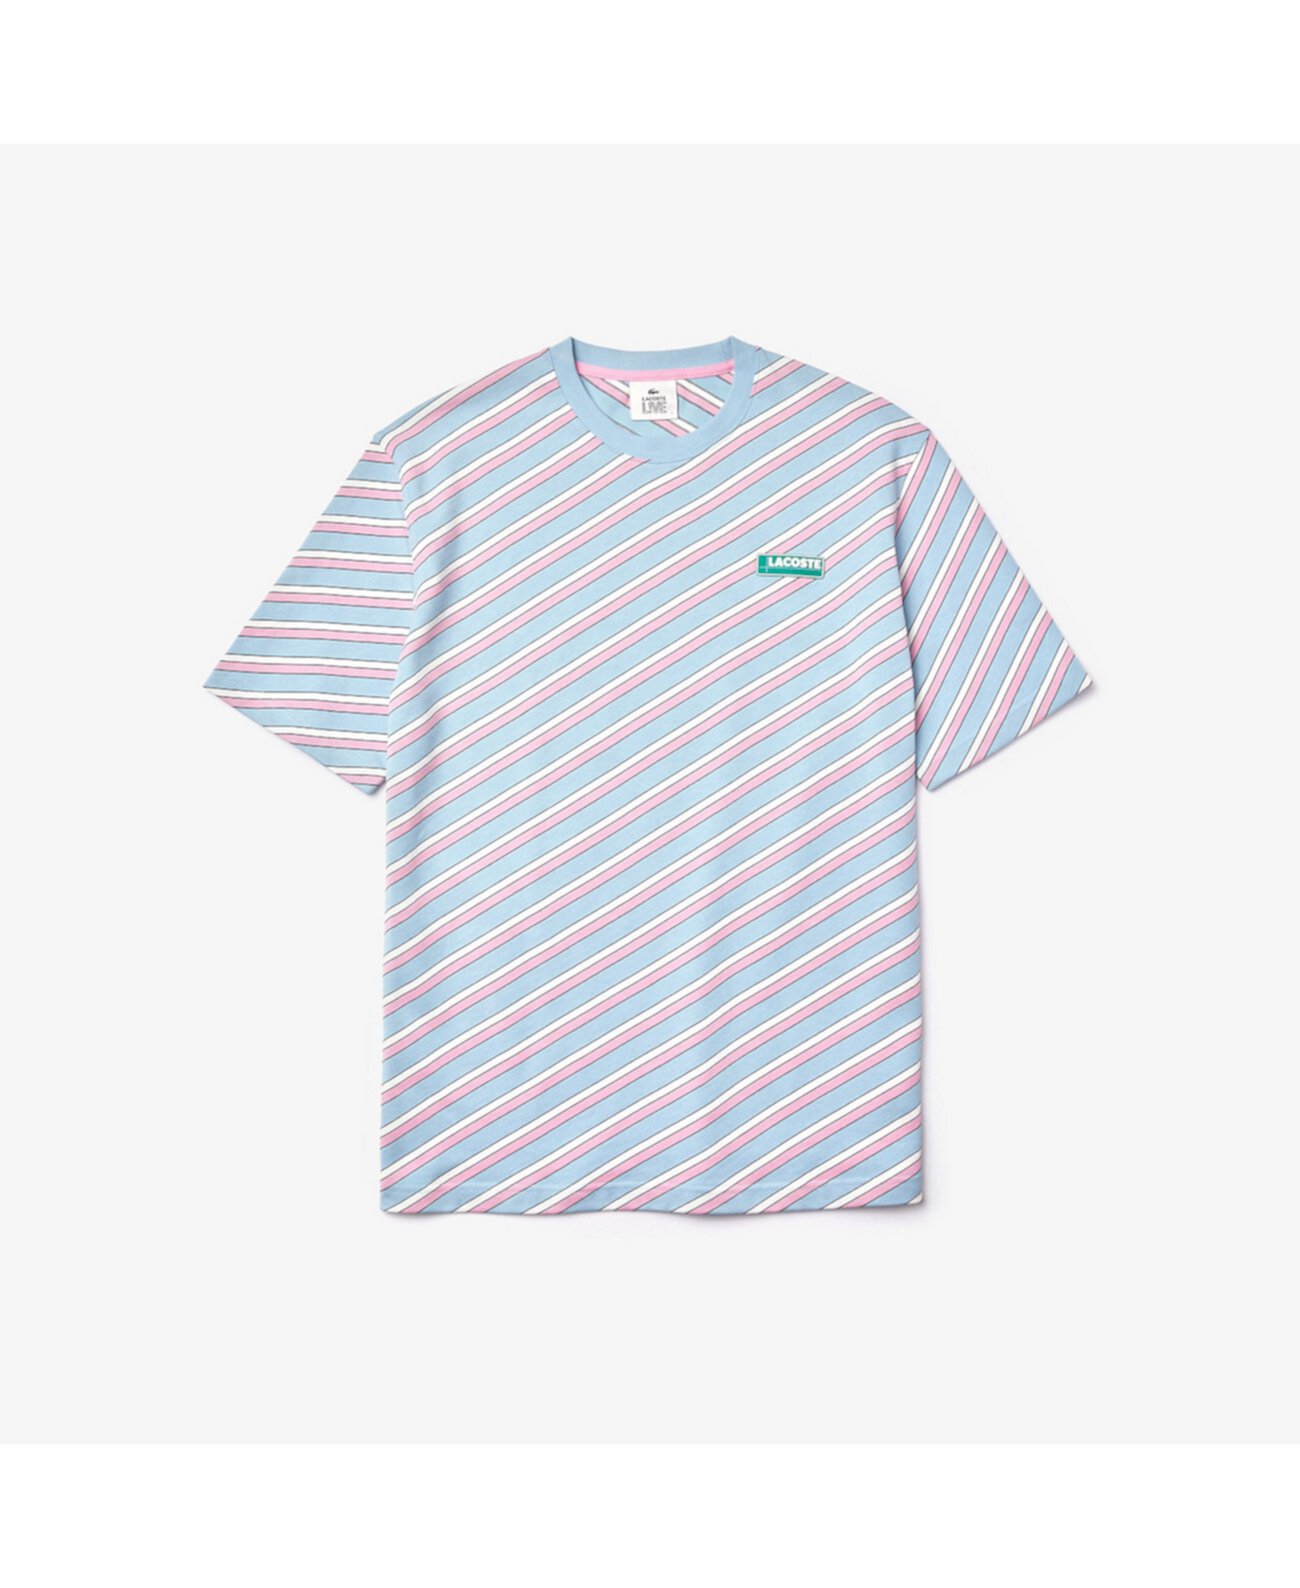 Men's LIVE Loose Fit Short Sleeve Crew Neck Jersey T-shirt with Diagonal Logo Stripes Lacoste